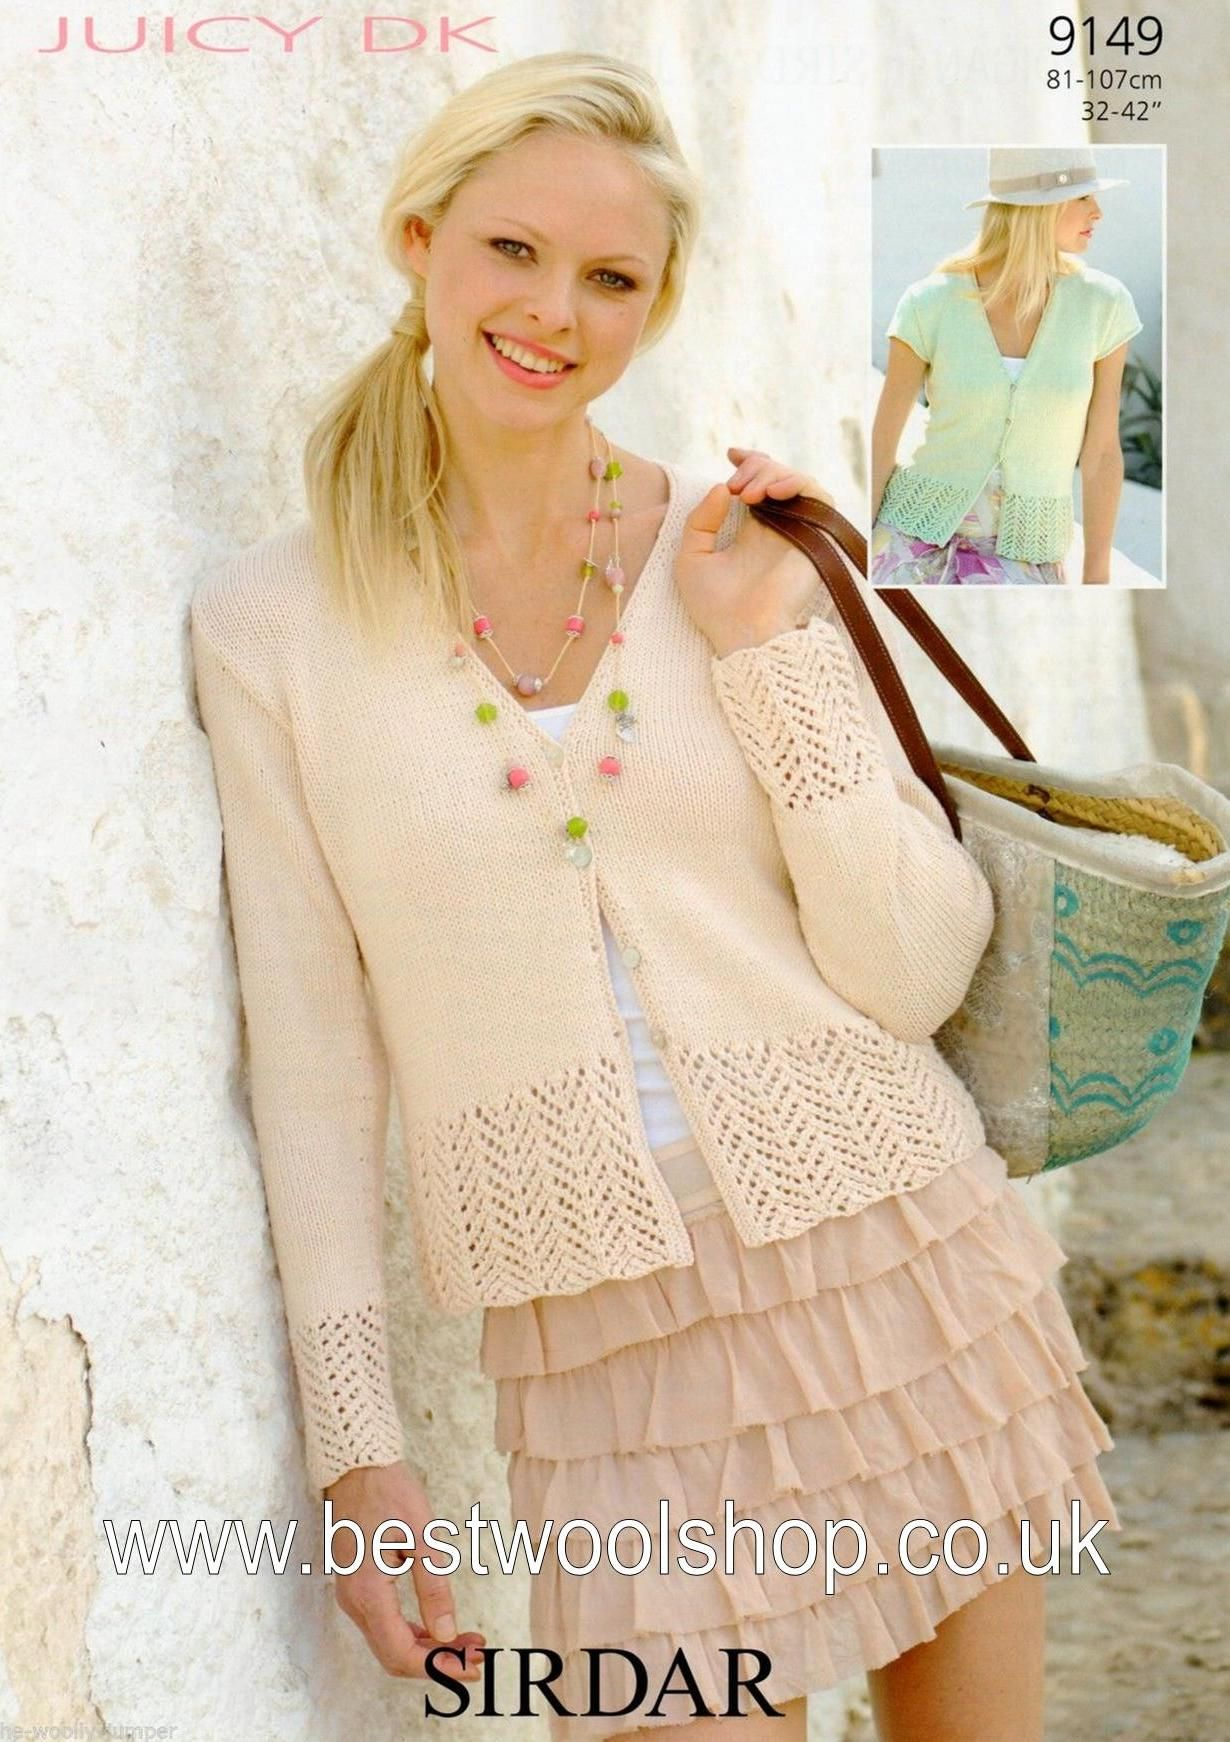 Jumper Knitting Patterns 9149 Sirdar Juicy Dk Lacy Edged Cardigan Knitting Pattern To Fit Chest 32 To 42